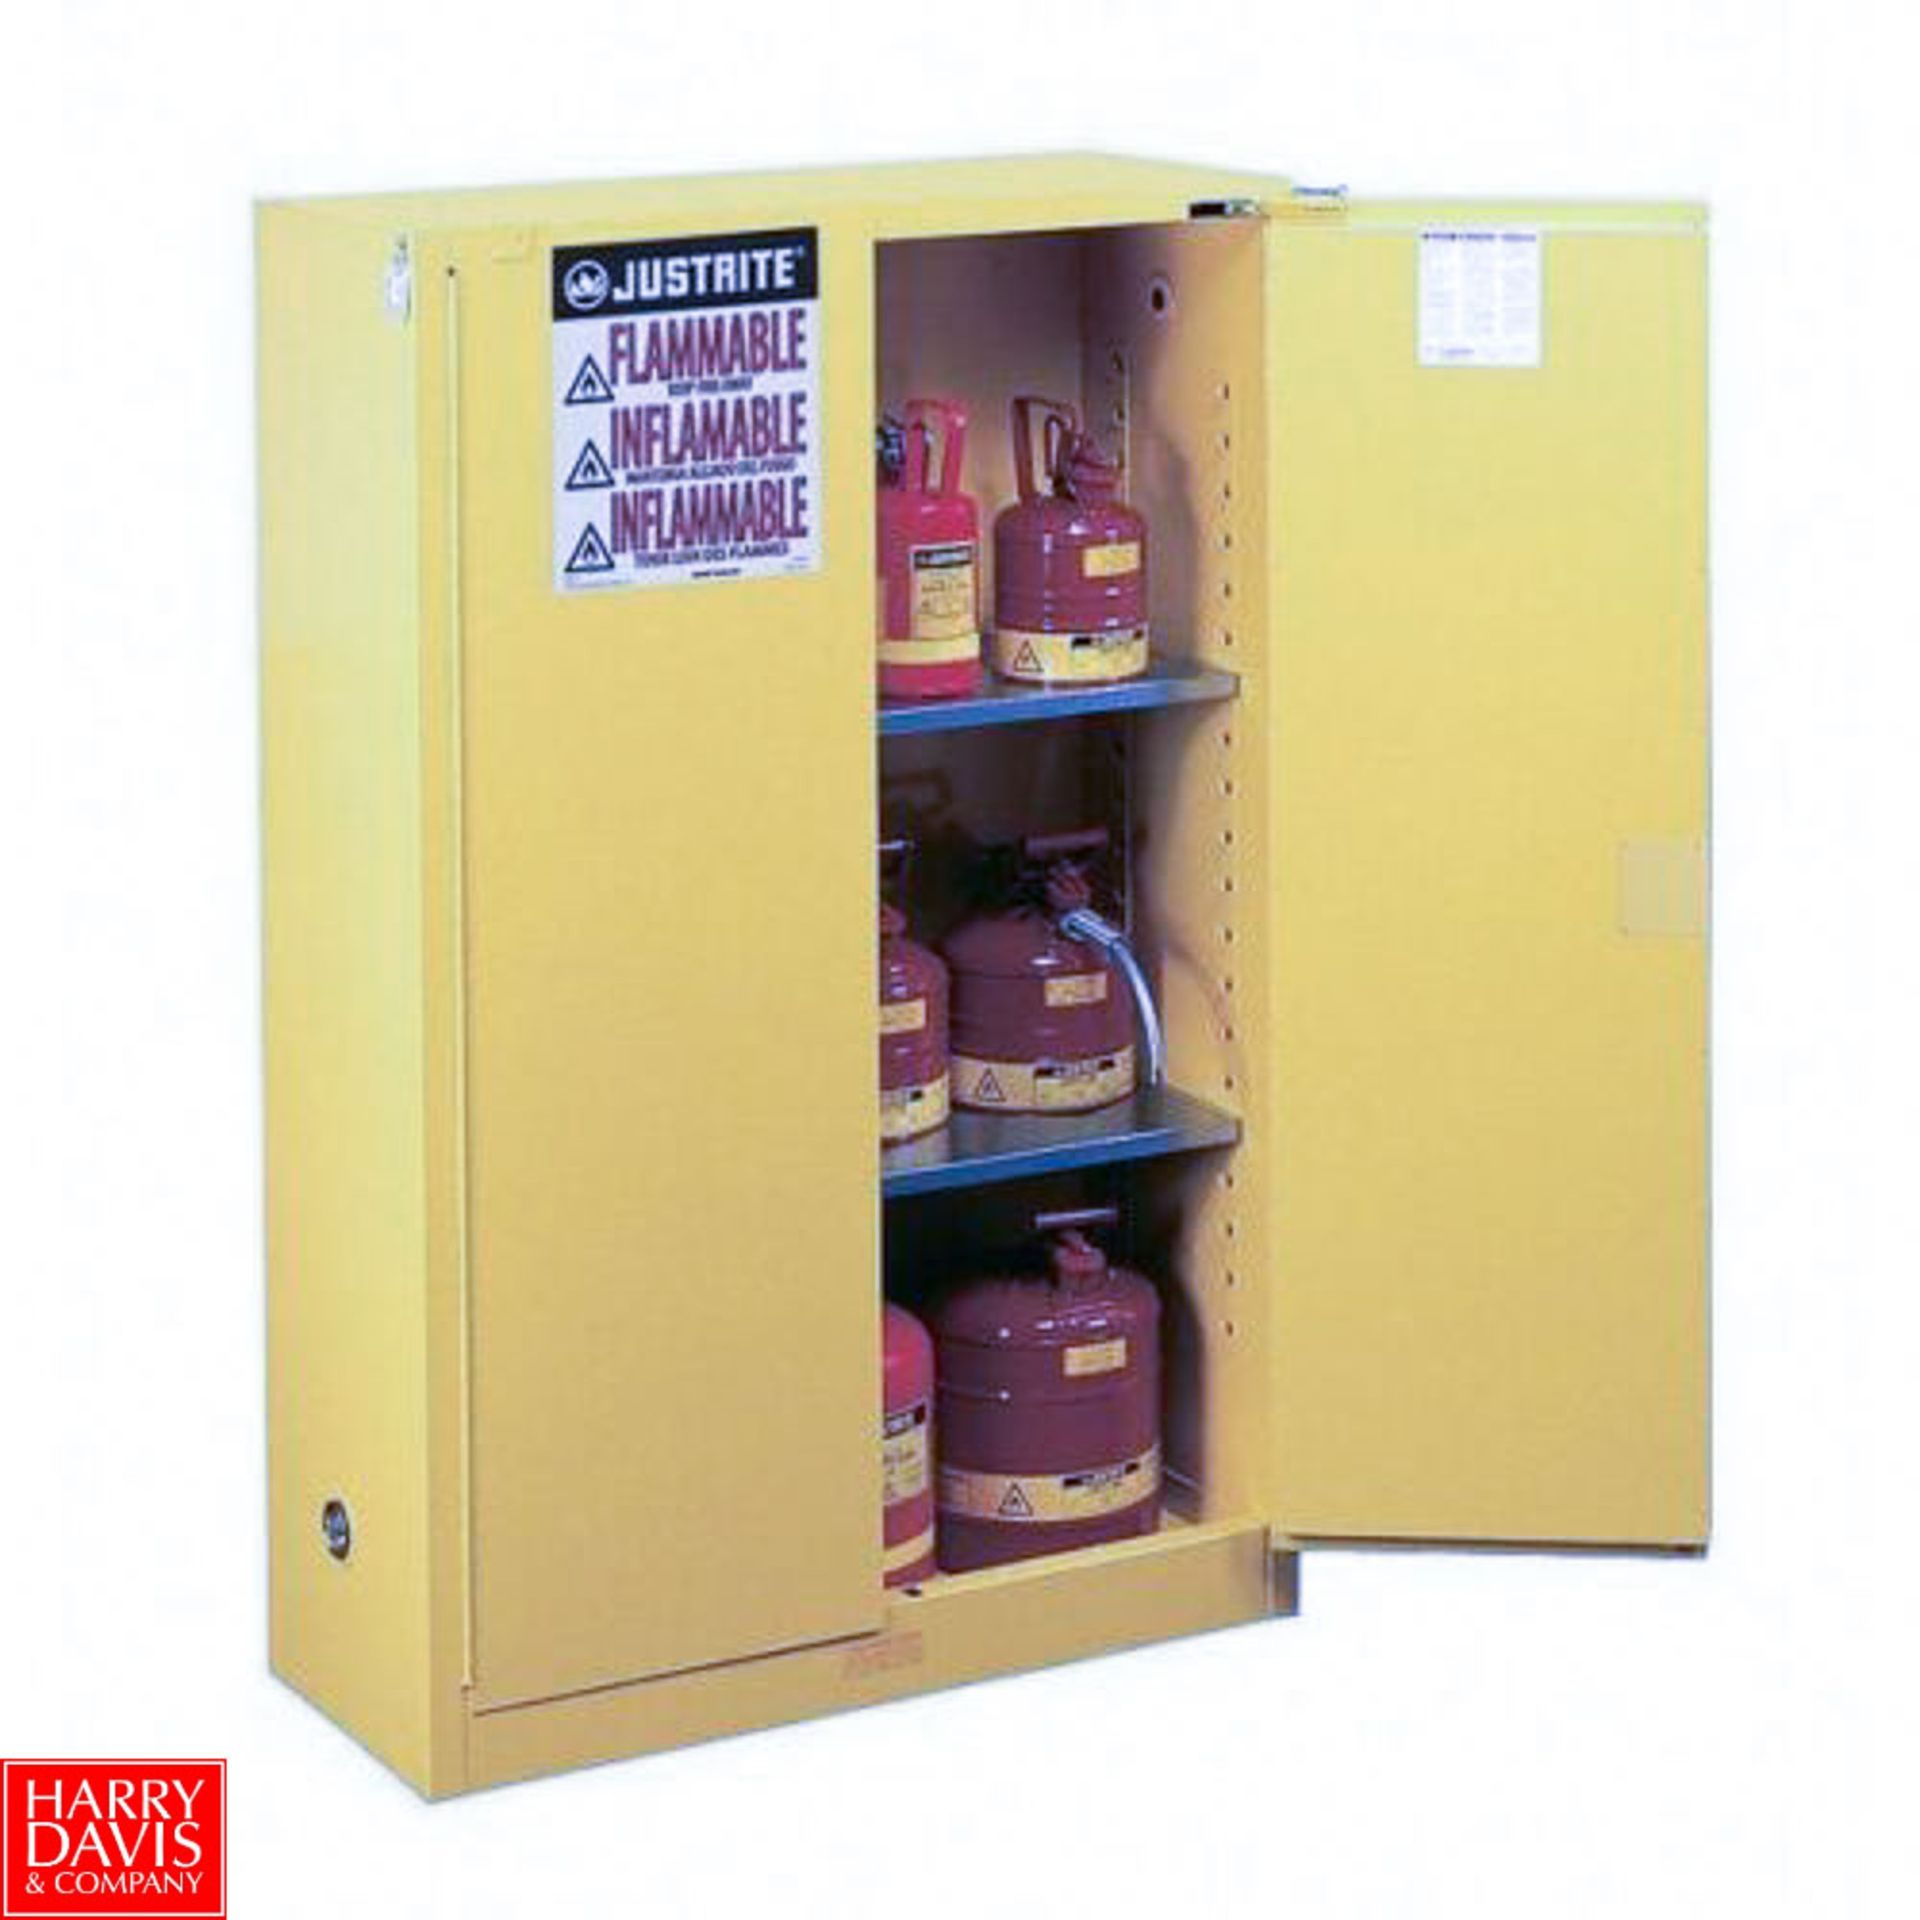 2018 Justrite 90 Gallon Sure-Grip EX Flammable Liquid Storage Cabinet (Located In Portland OR) - - Image 7 of 7